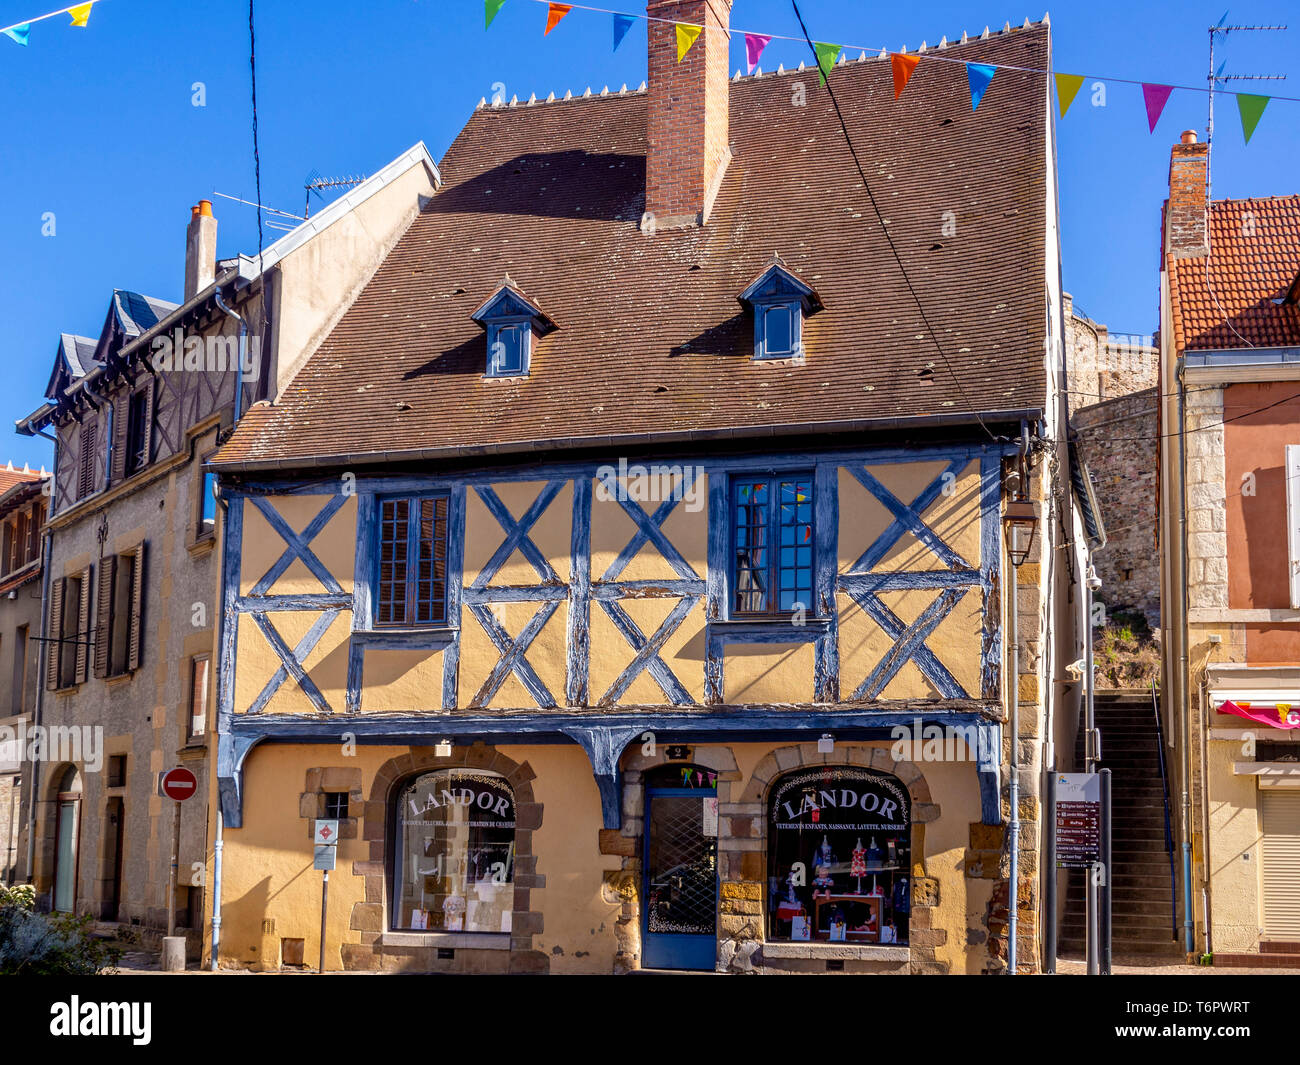 Historic half-timbered house, Montlucon, Allier department, Auvergne-Rhone-Alpes, France, Europe Stock Photo